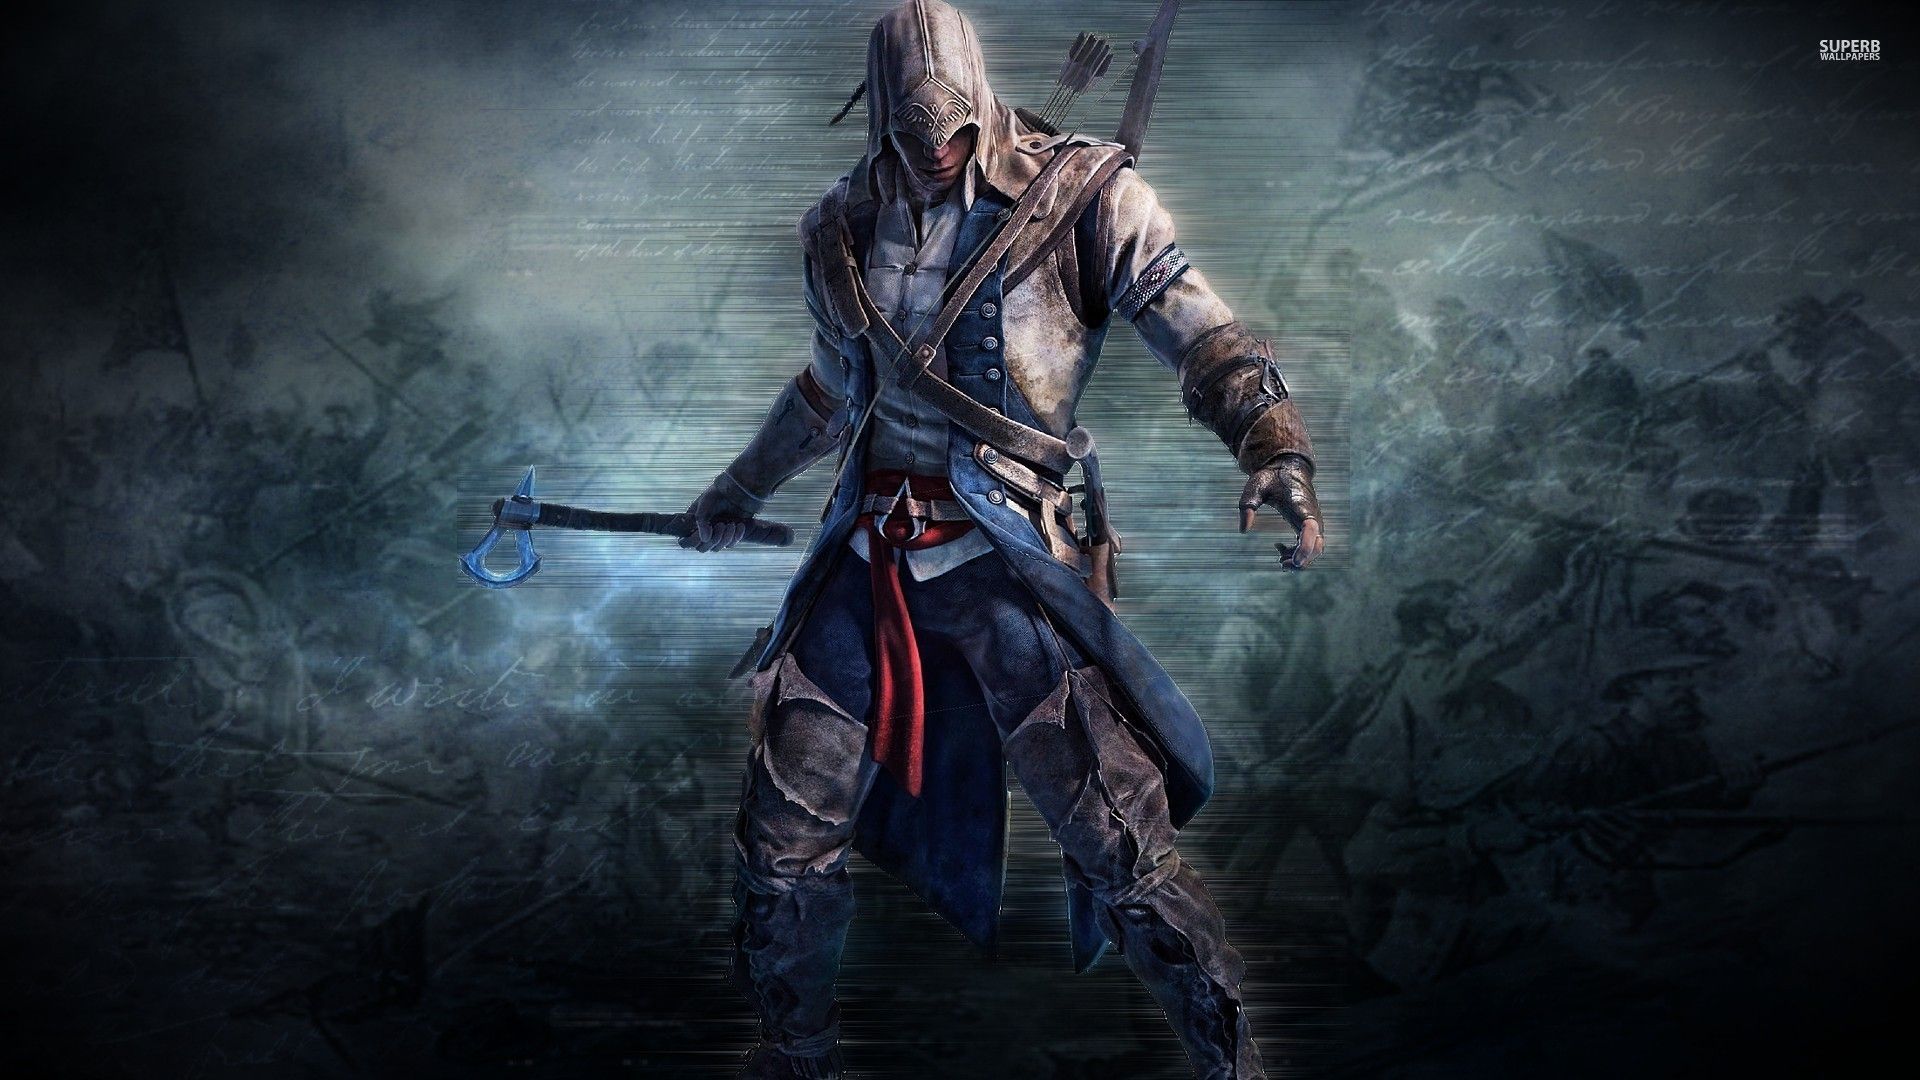 Connor kenway with an ax assassins creed iii 49880 1920x1080